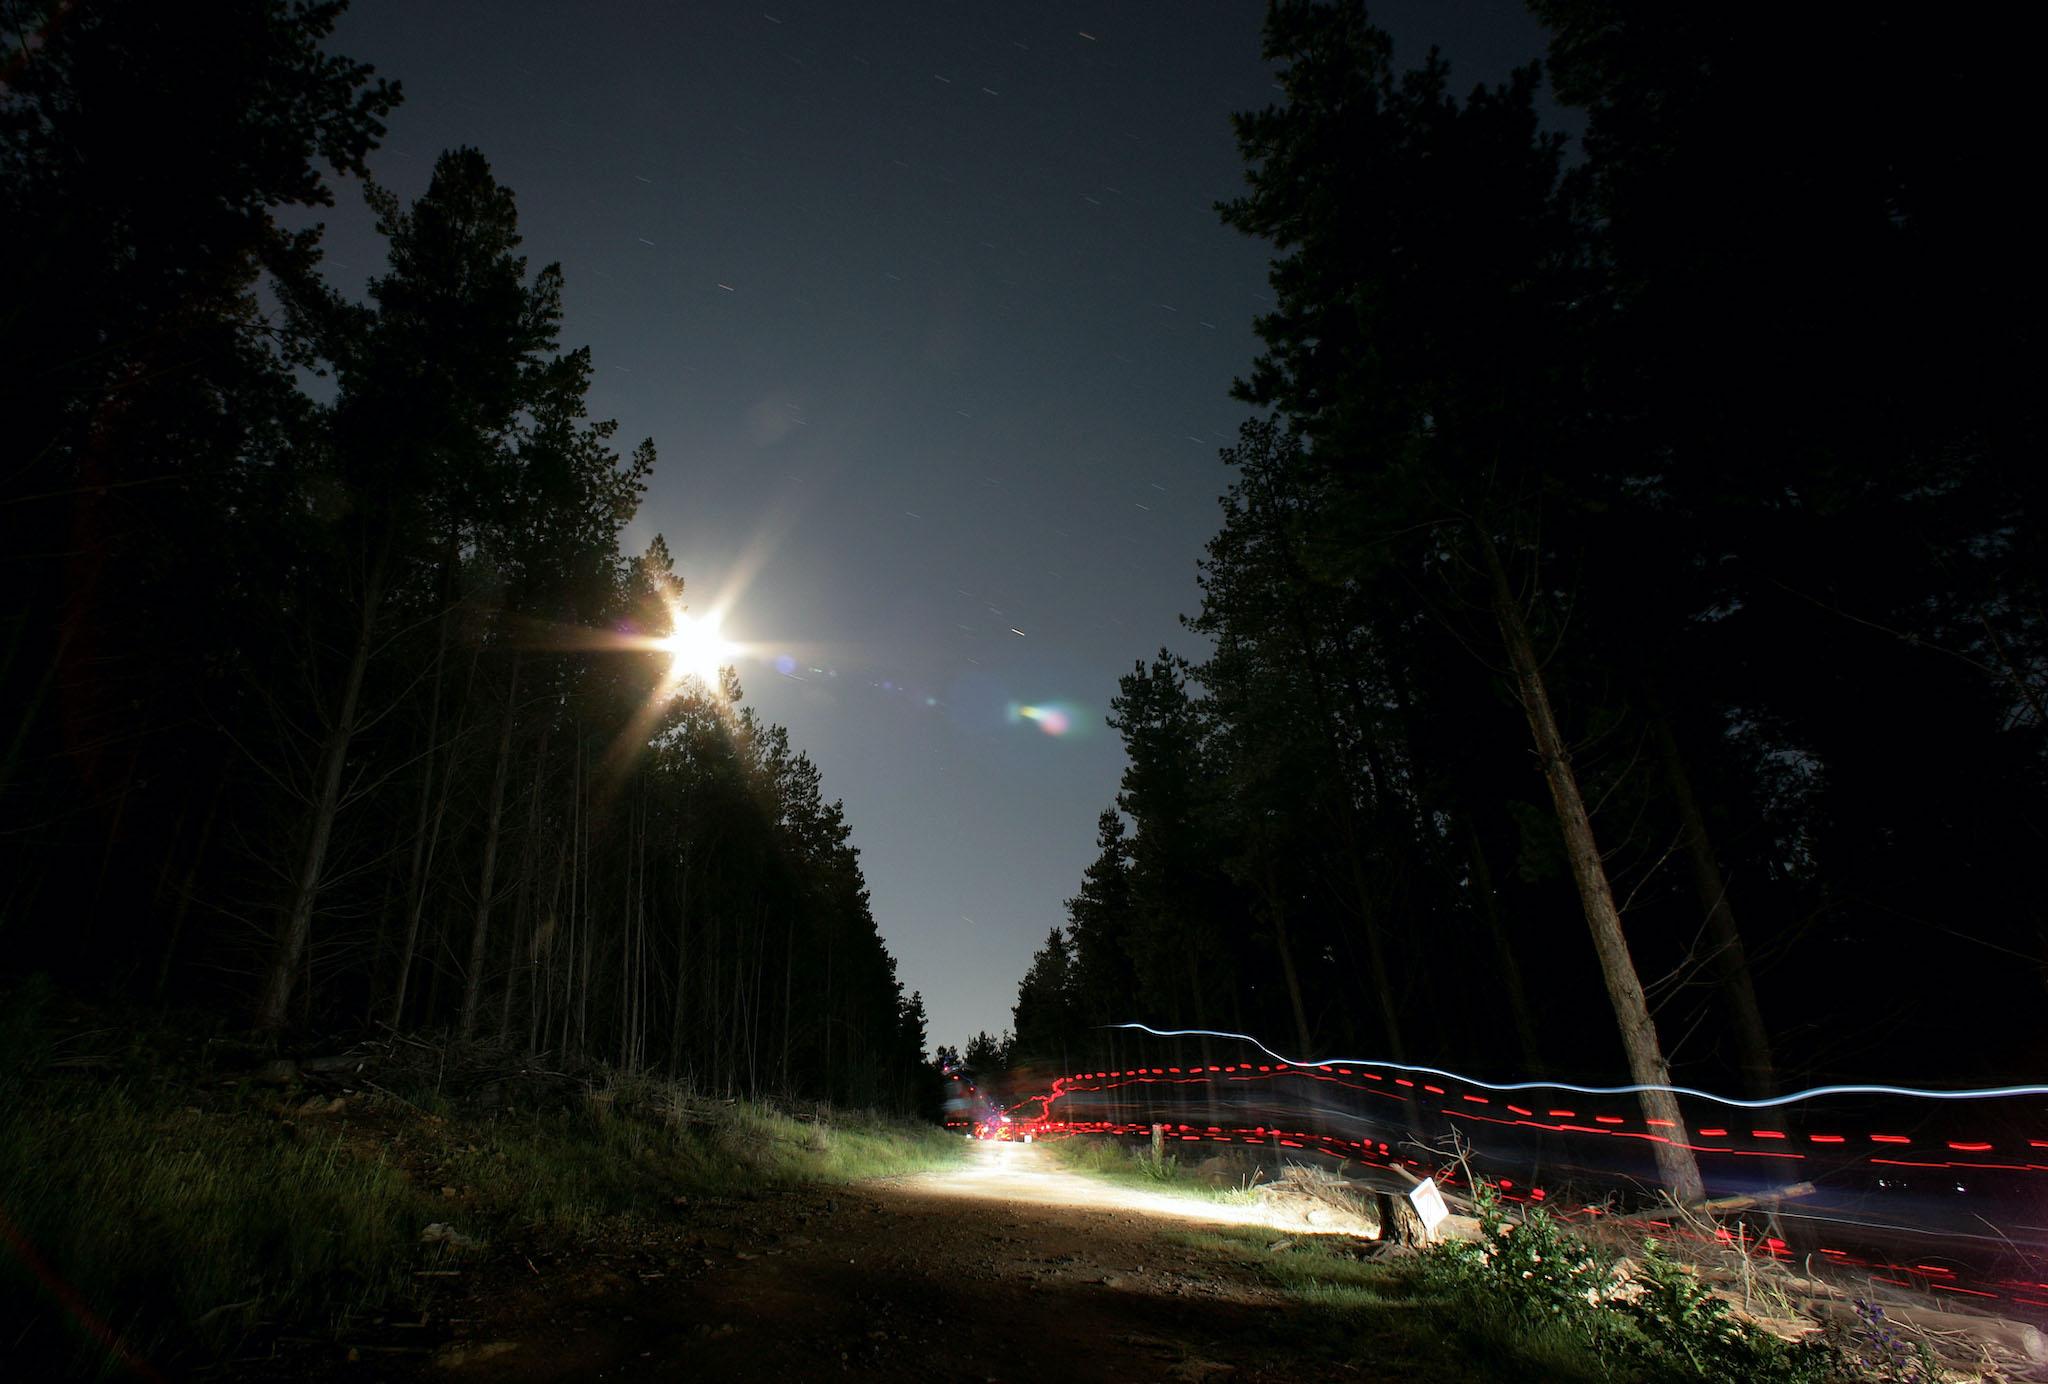 Riders leave light trails on a full-moon lit night during the Mont 24 Hour MTB Race held at Majura Pines forest